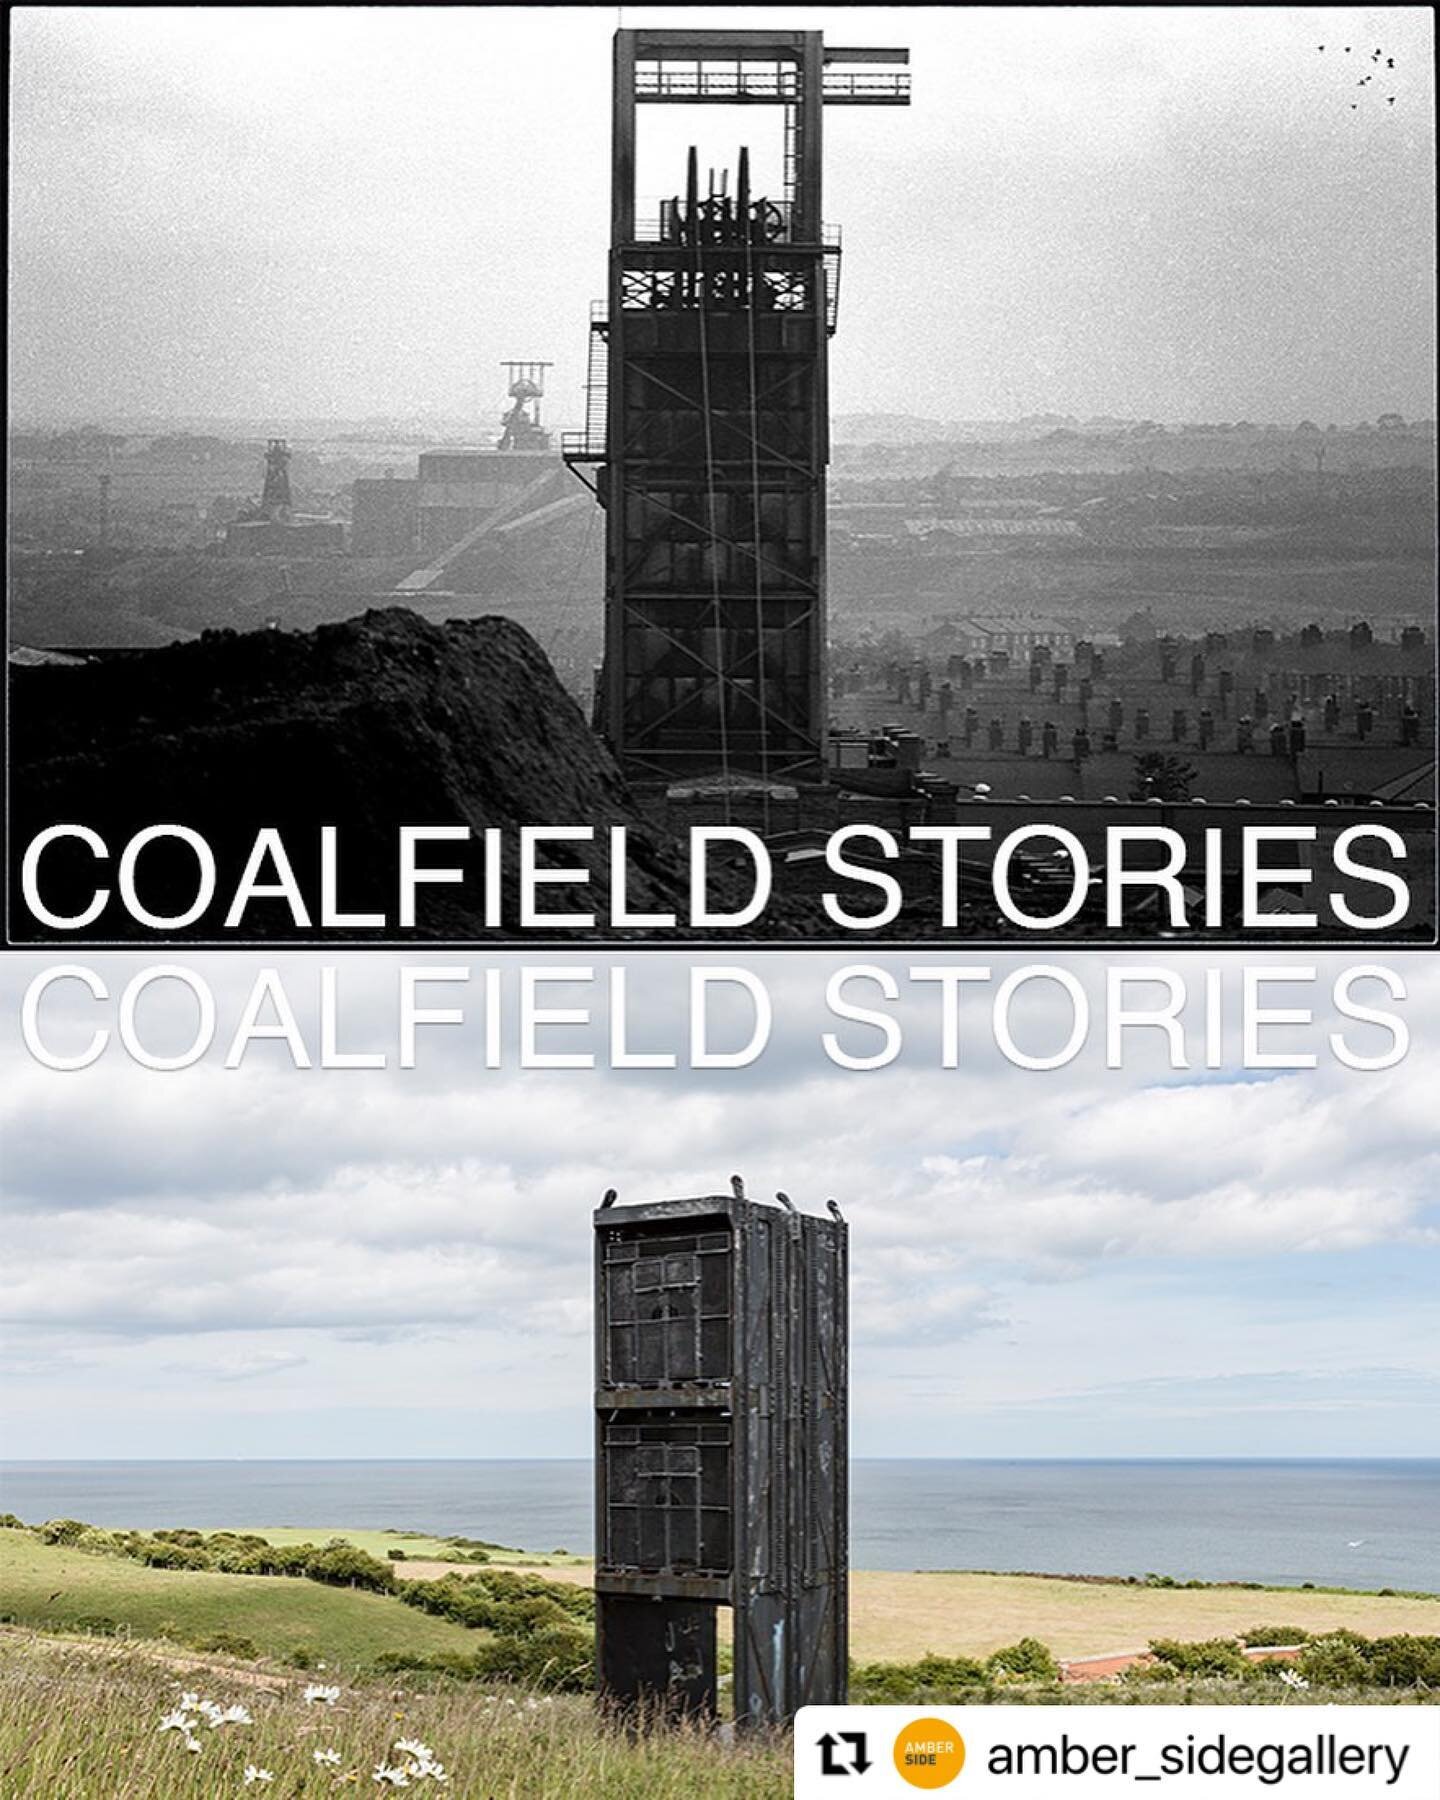 Very pleased to have one of my Easington images used alongside Keith Pattison&rsquo;s iconic image, for the cover of @amber_sidegallery &lsquo;s multimedia magazine &lsquo;Coalfield Stories&rsquo;; celebrating AmberSides engagement over the past 40 y